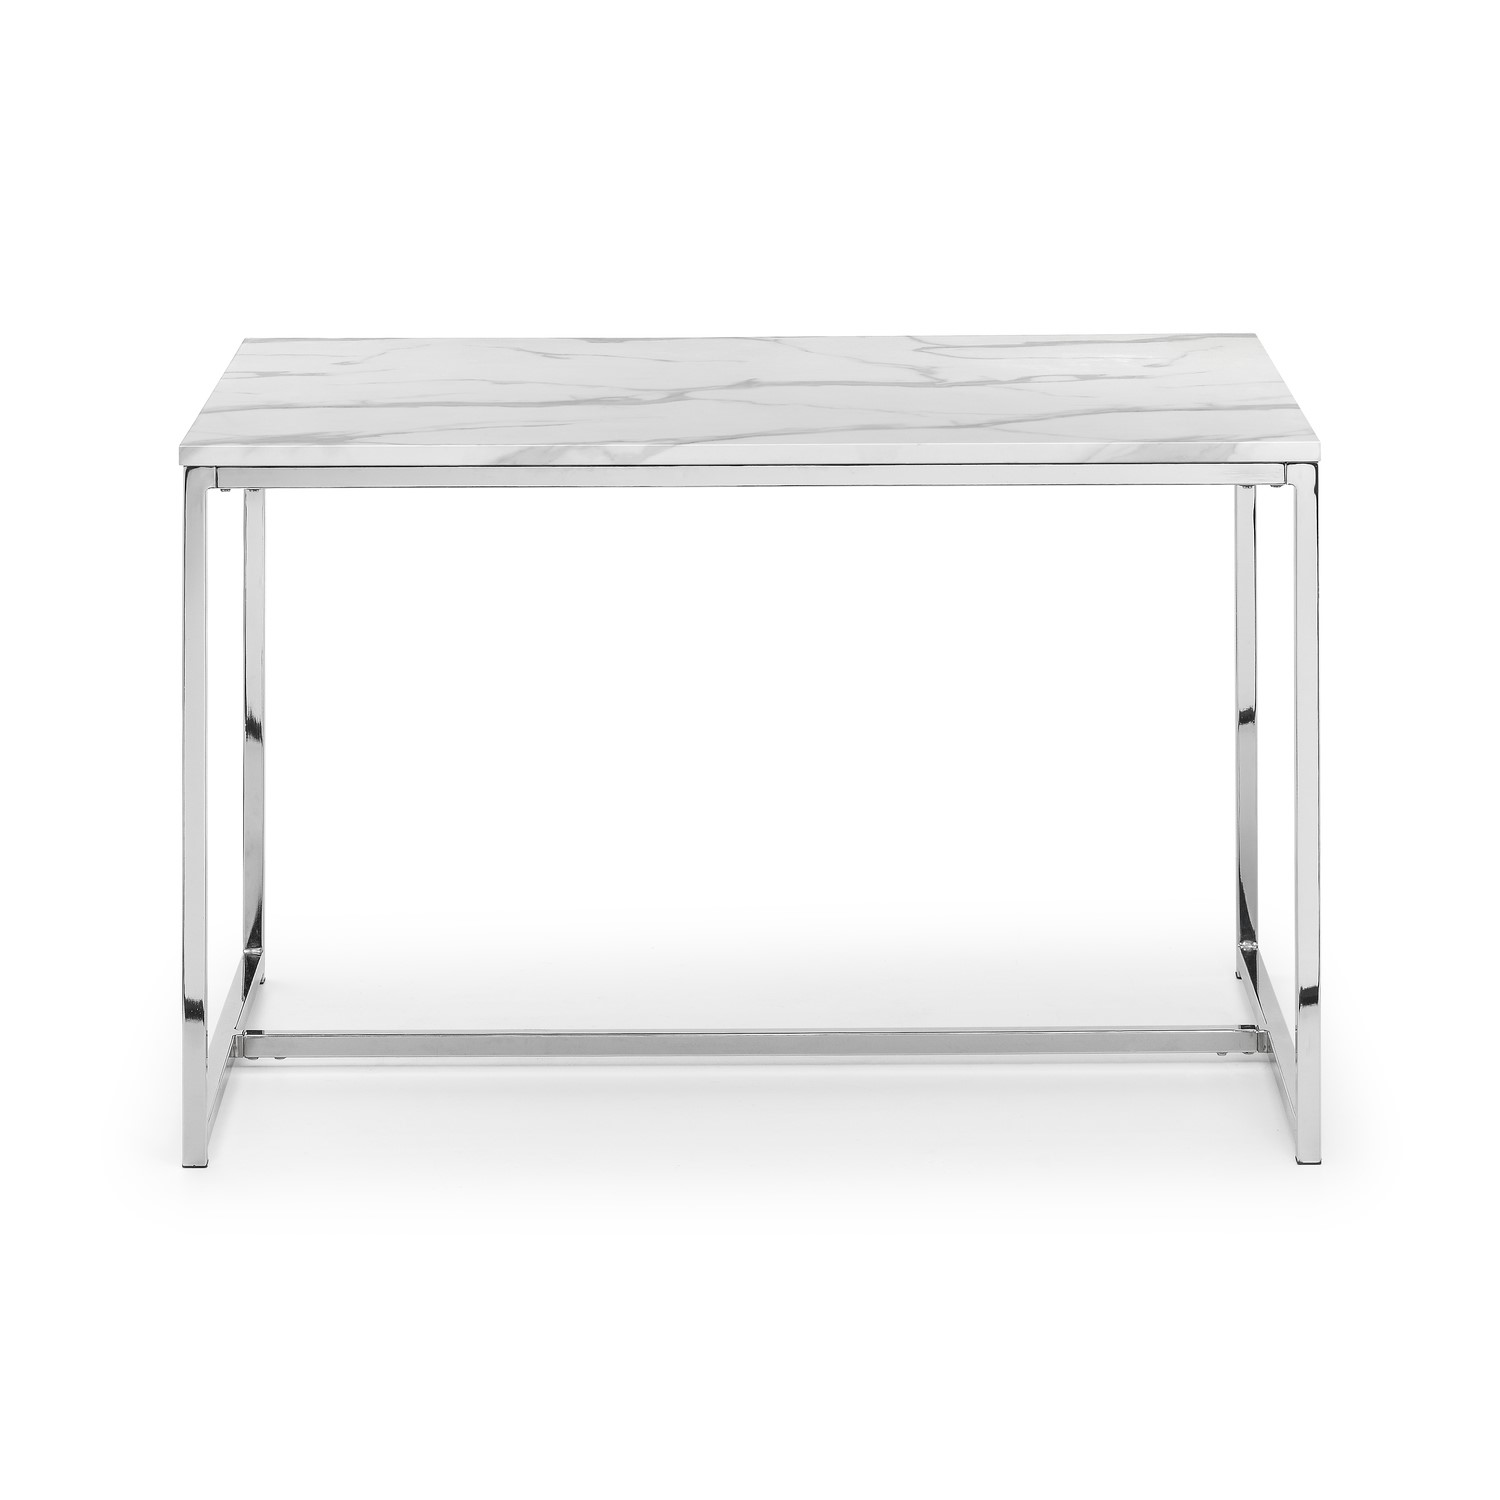 Photo of Small white marble dining table with mirrored legs - seats 4 - julian bowen scala